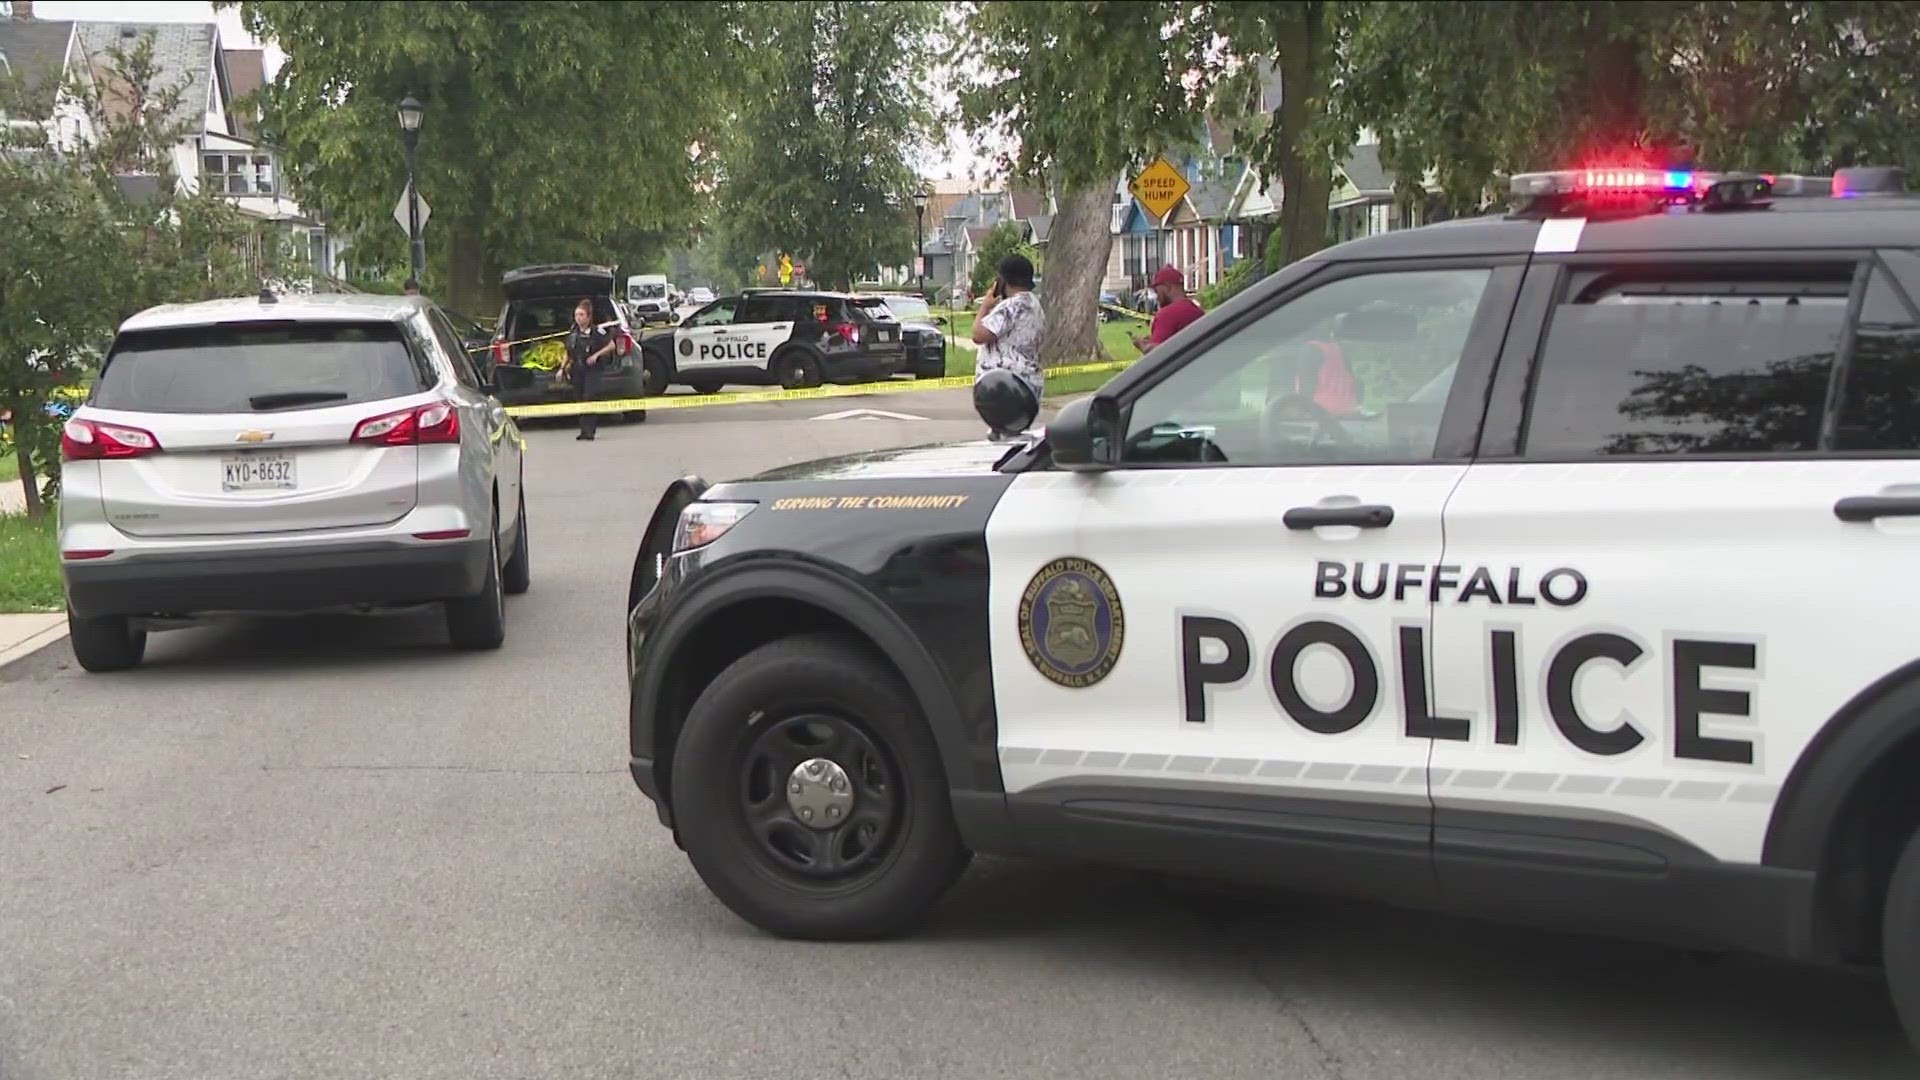 A Buffalo Police Department spokesperson says a 21-year-old Buffalo man died at the scene